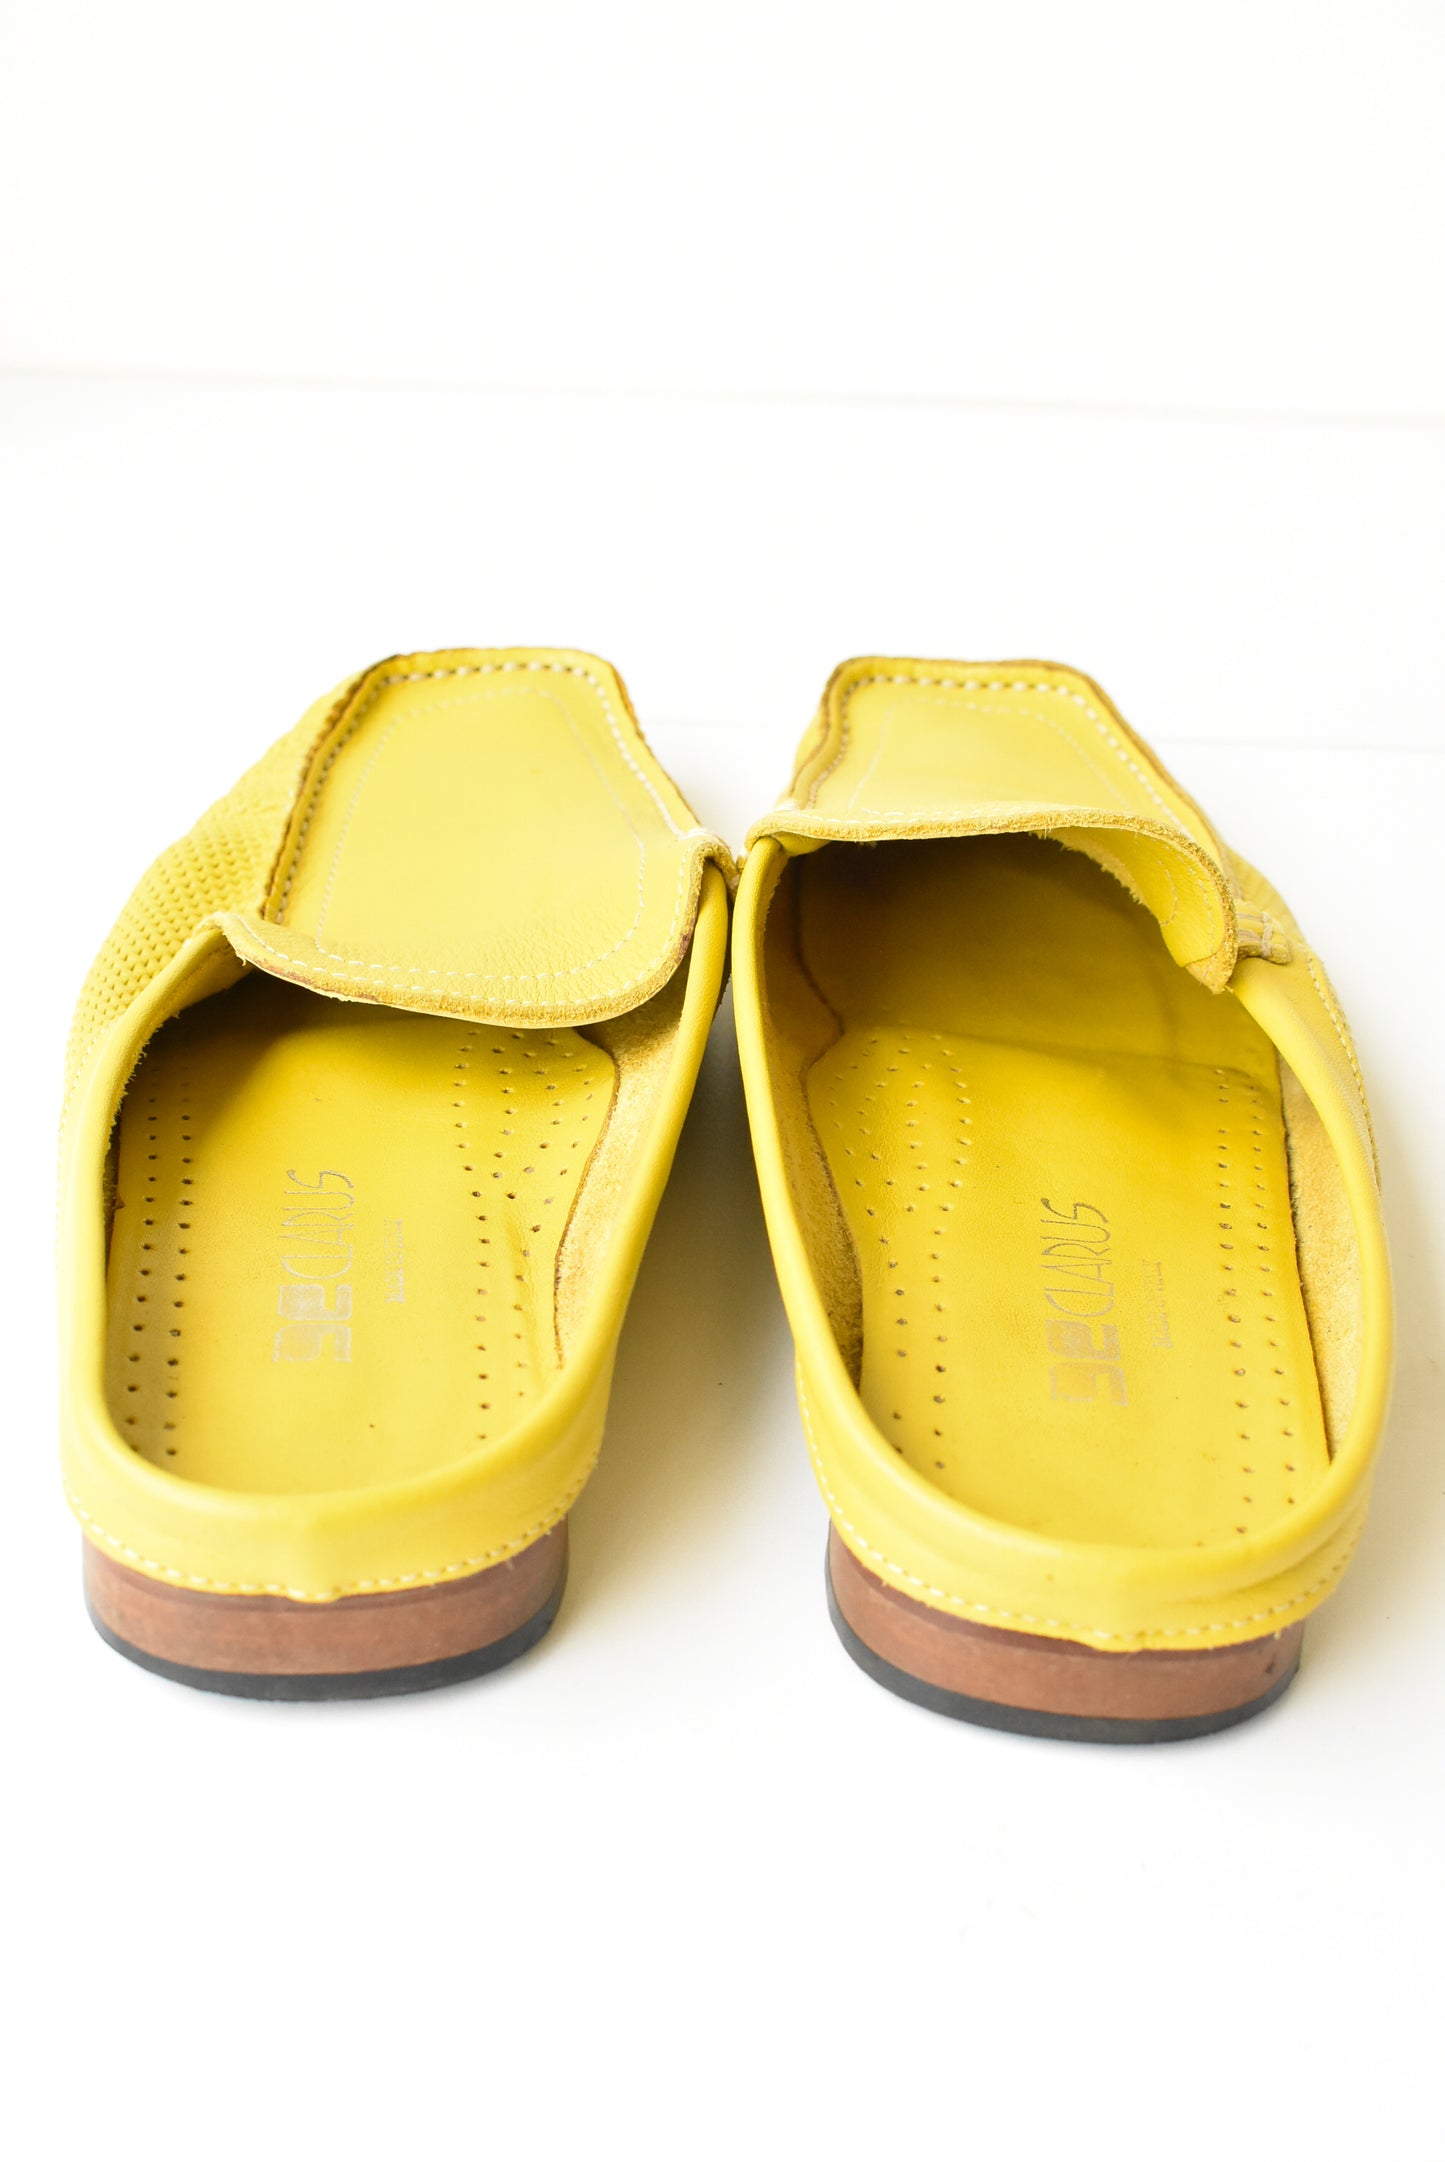 Clarus leather open moccasins, Italian made